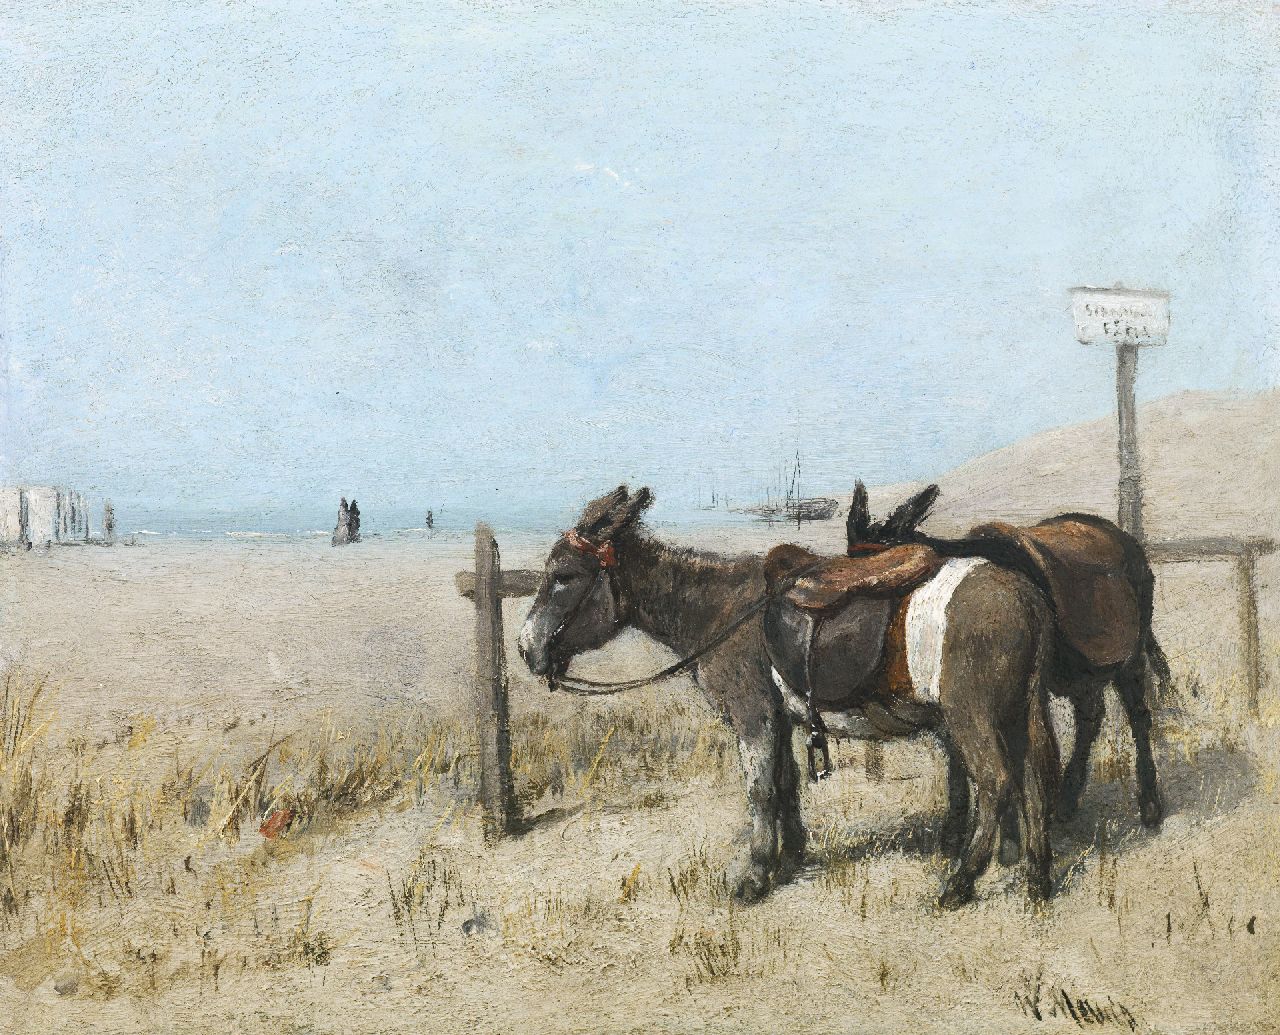 Maris W.  | Willem Maris, Donkeys on the beach, oil on panel 19.3 x 23.8 cm, signed l.r. and painted ca. 1866-1868